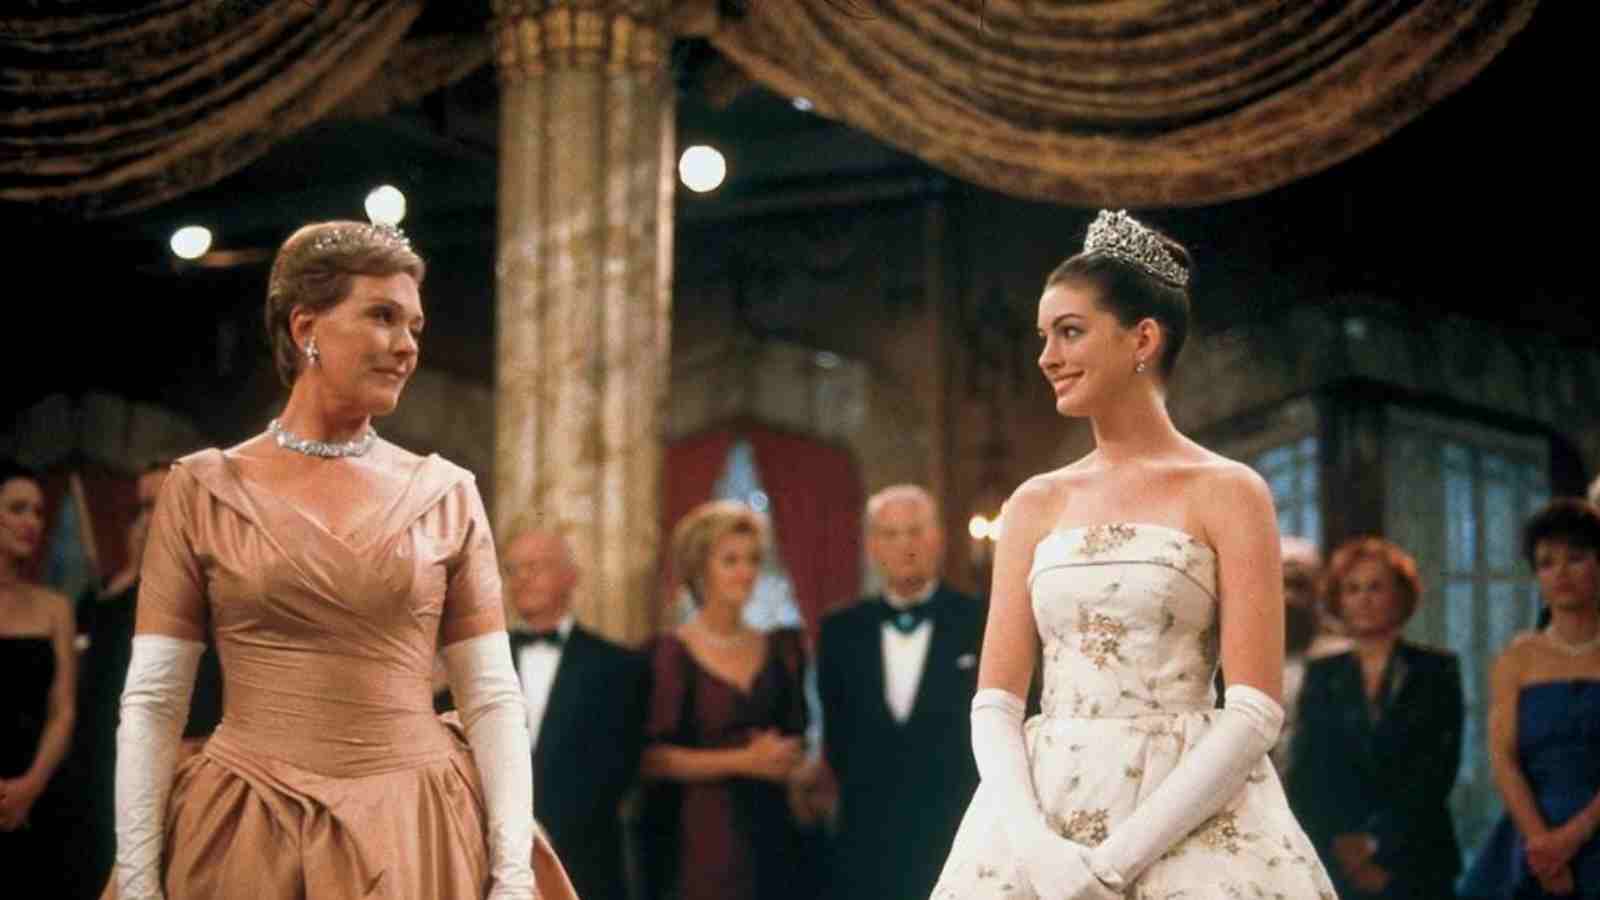 Here's everything you need to know about 'The Princess Diaries 3'